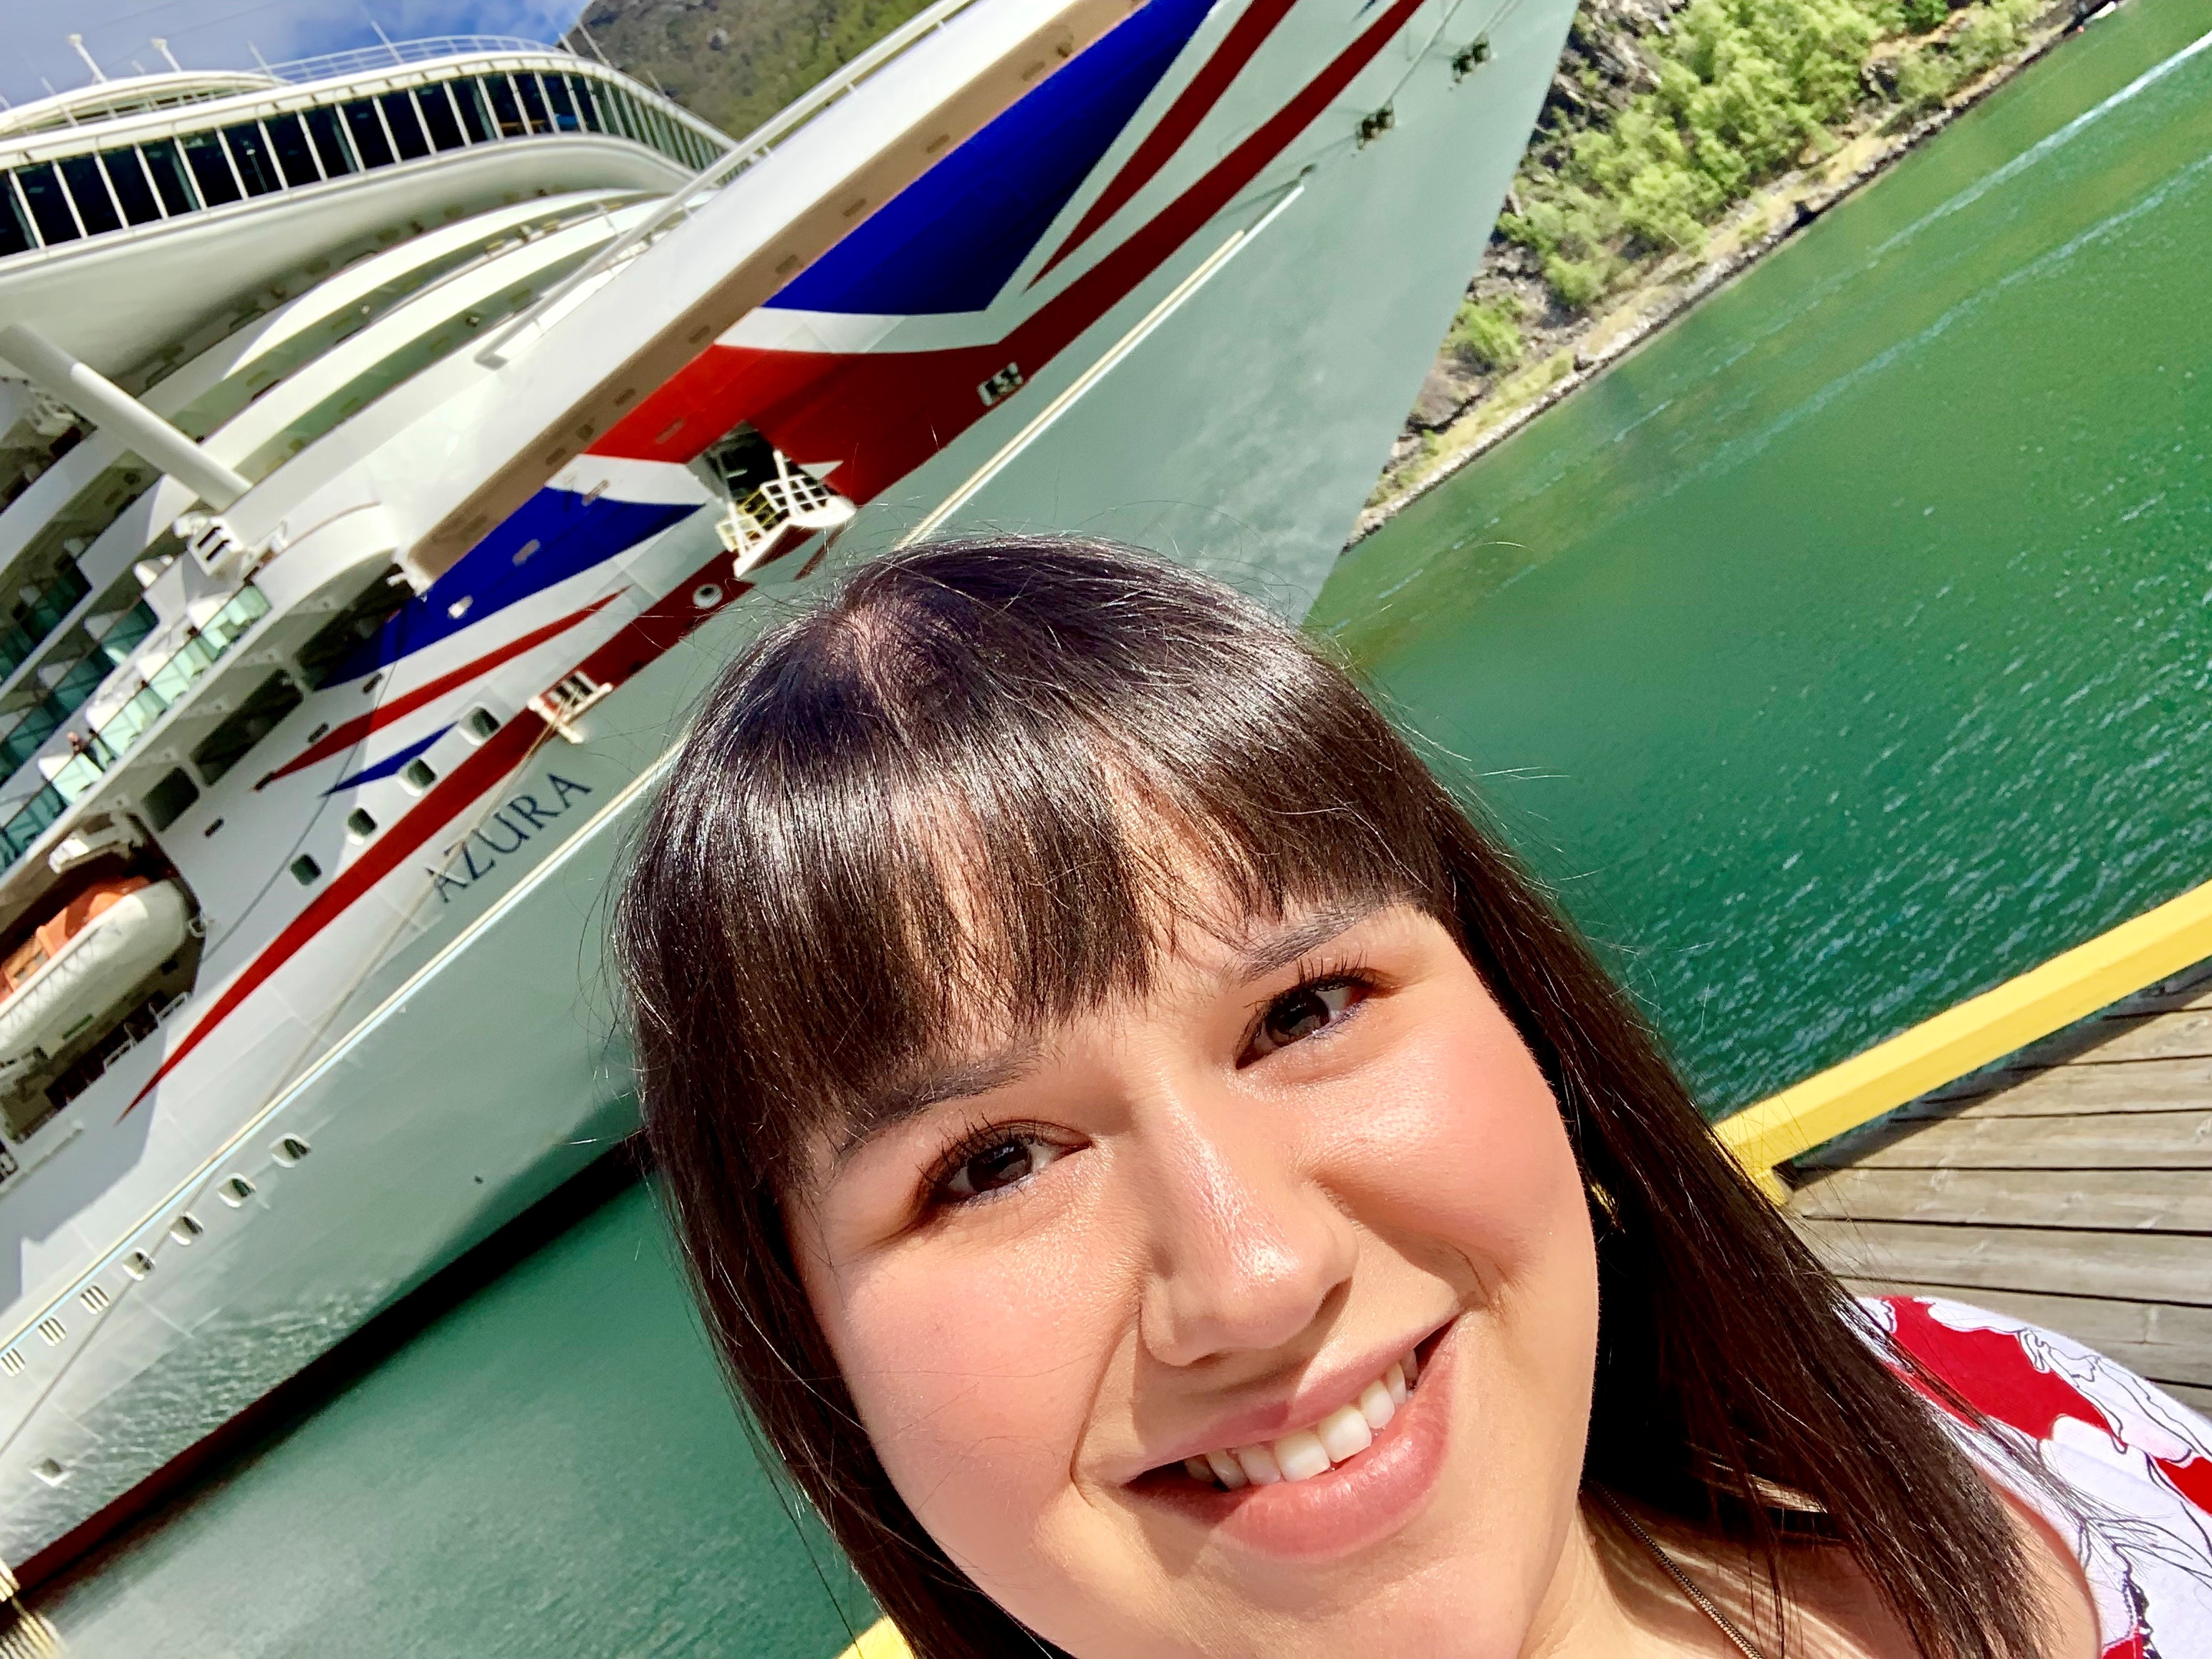 Sam in front of a Cruise Ship